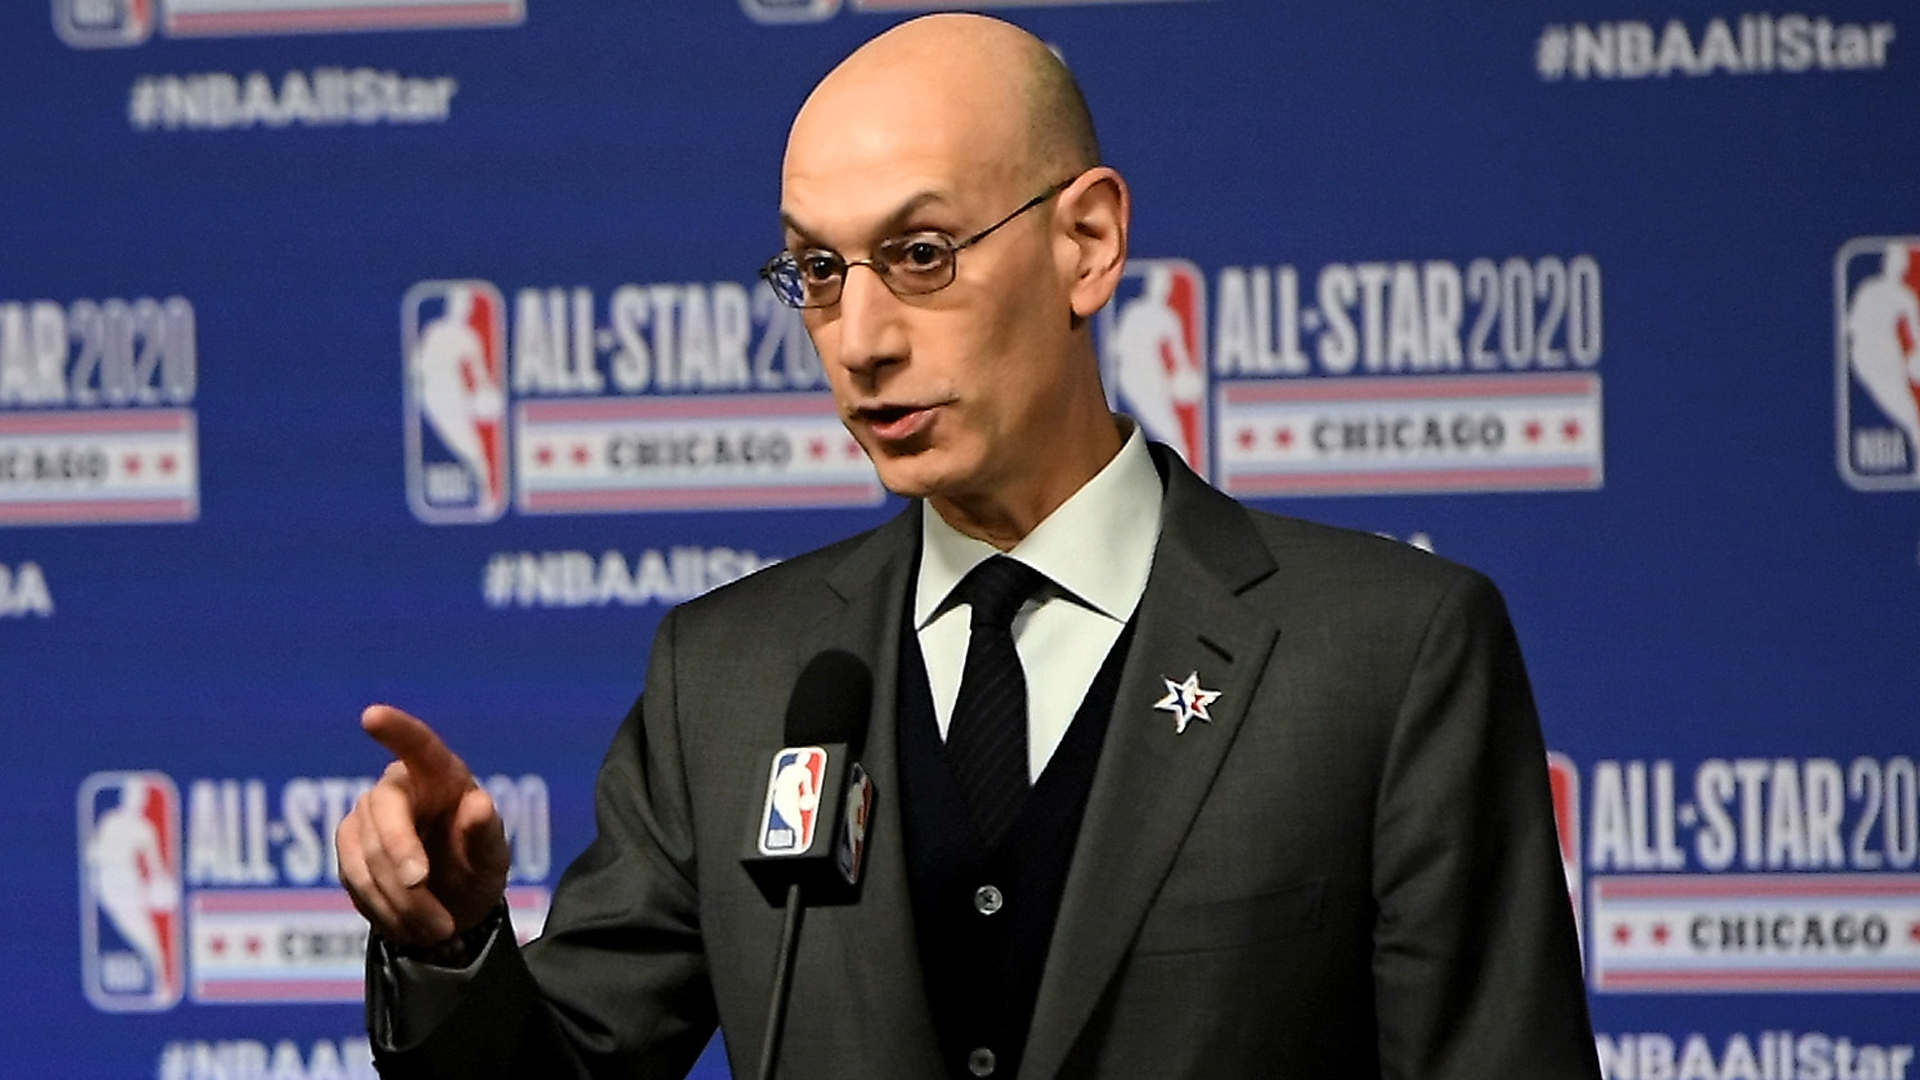 As it prepares to resume amid the coronavirus pandemic, the NBA is considering its options with older coaches.